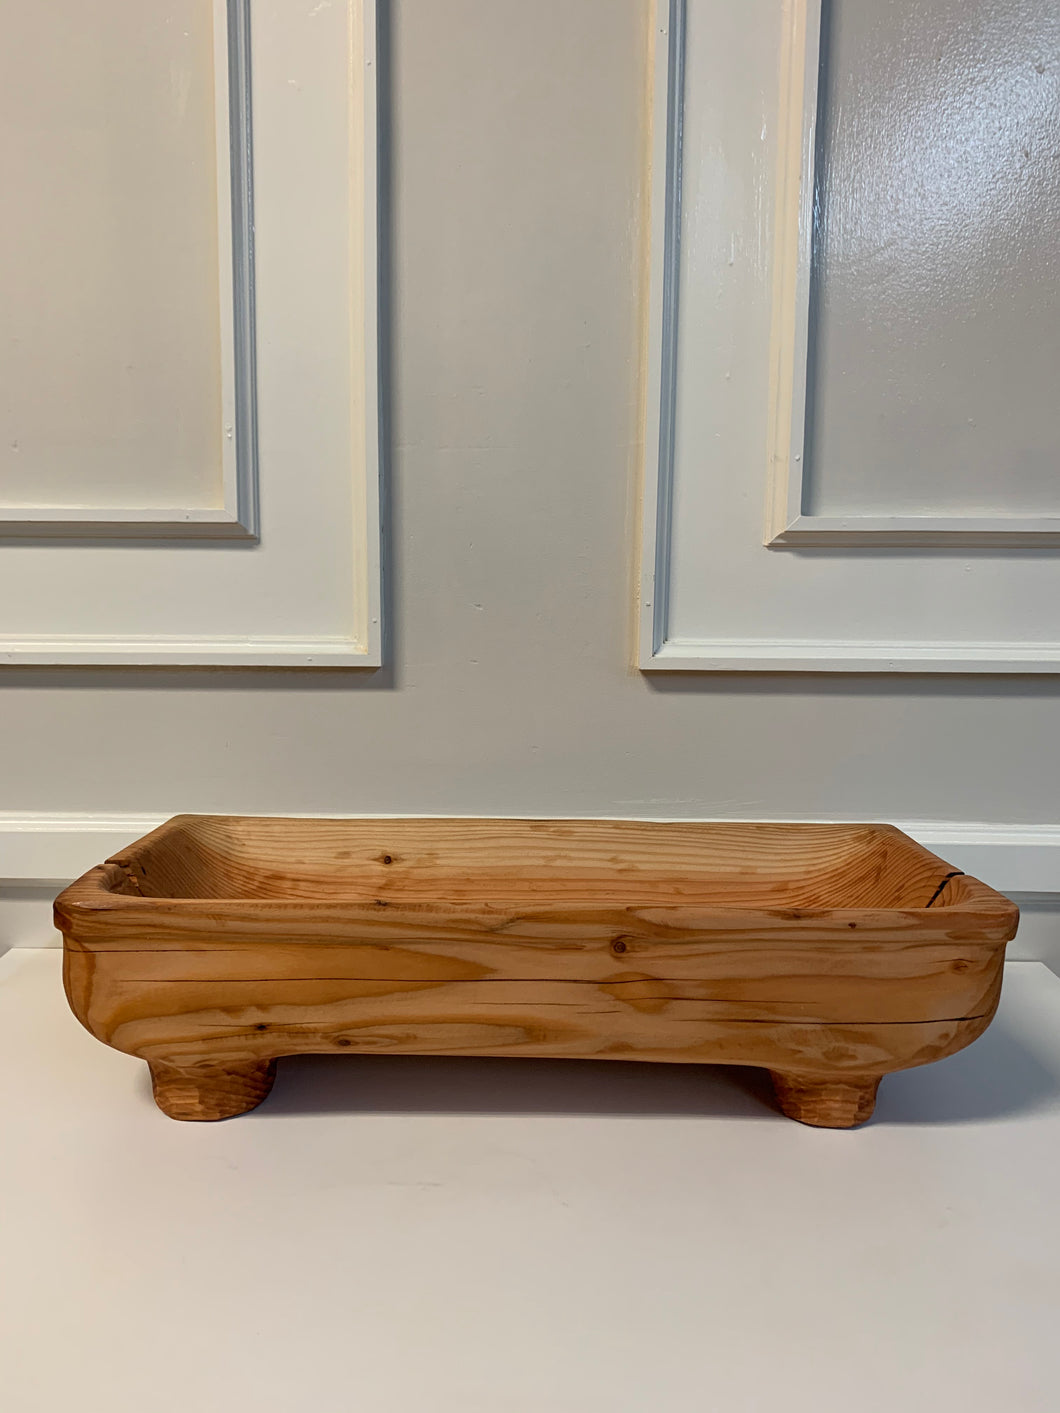 Large Rustic Wooden Bowl